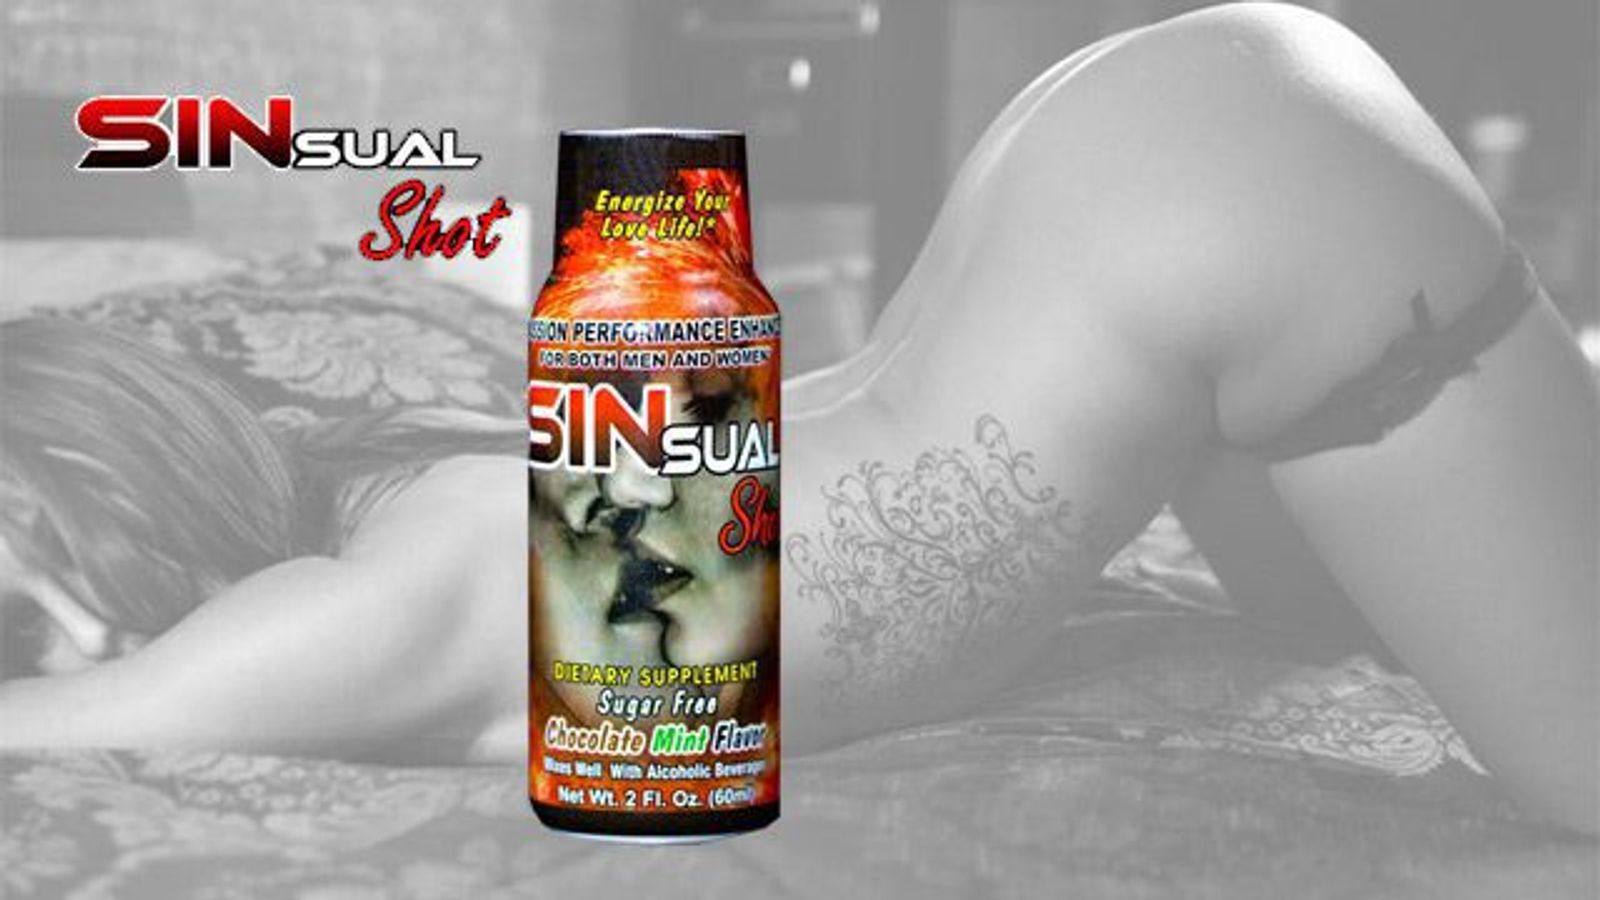 SINsual Shot Sexual Enhancement Drink Fuels Hot Party in Dallas